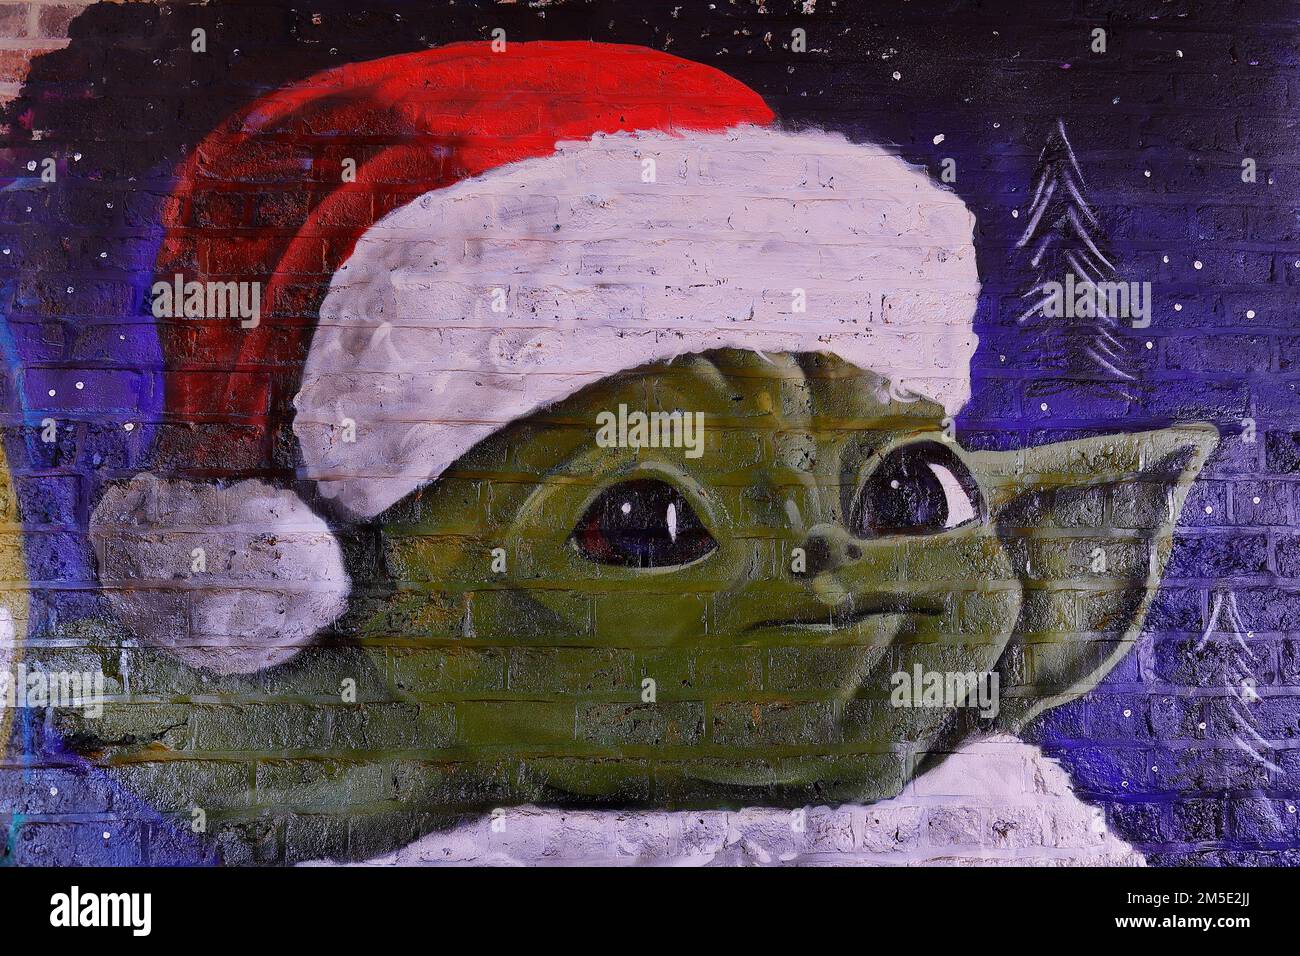 A close up of a Christmas Star Wars mural in Leeds featuring Yoda in a Santa hat. Created by artist Laffiti & Northern Mural Co Stock Photo